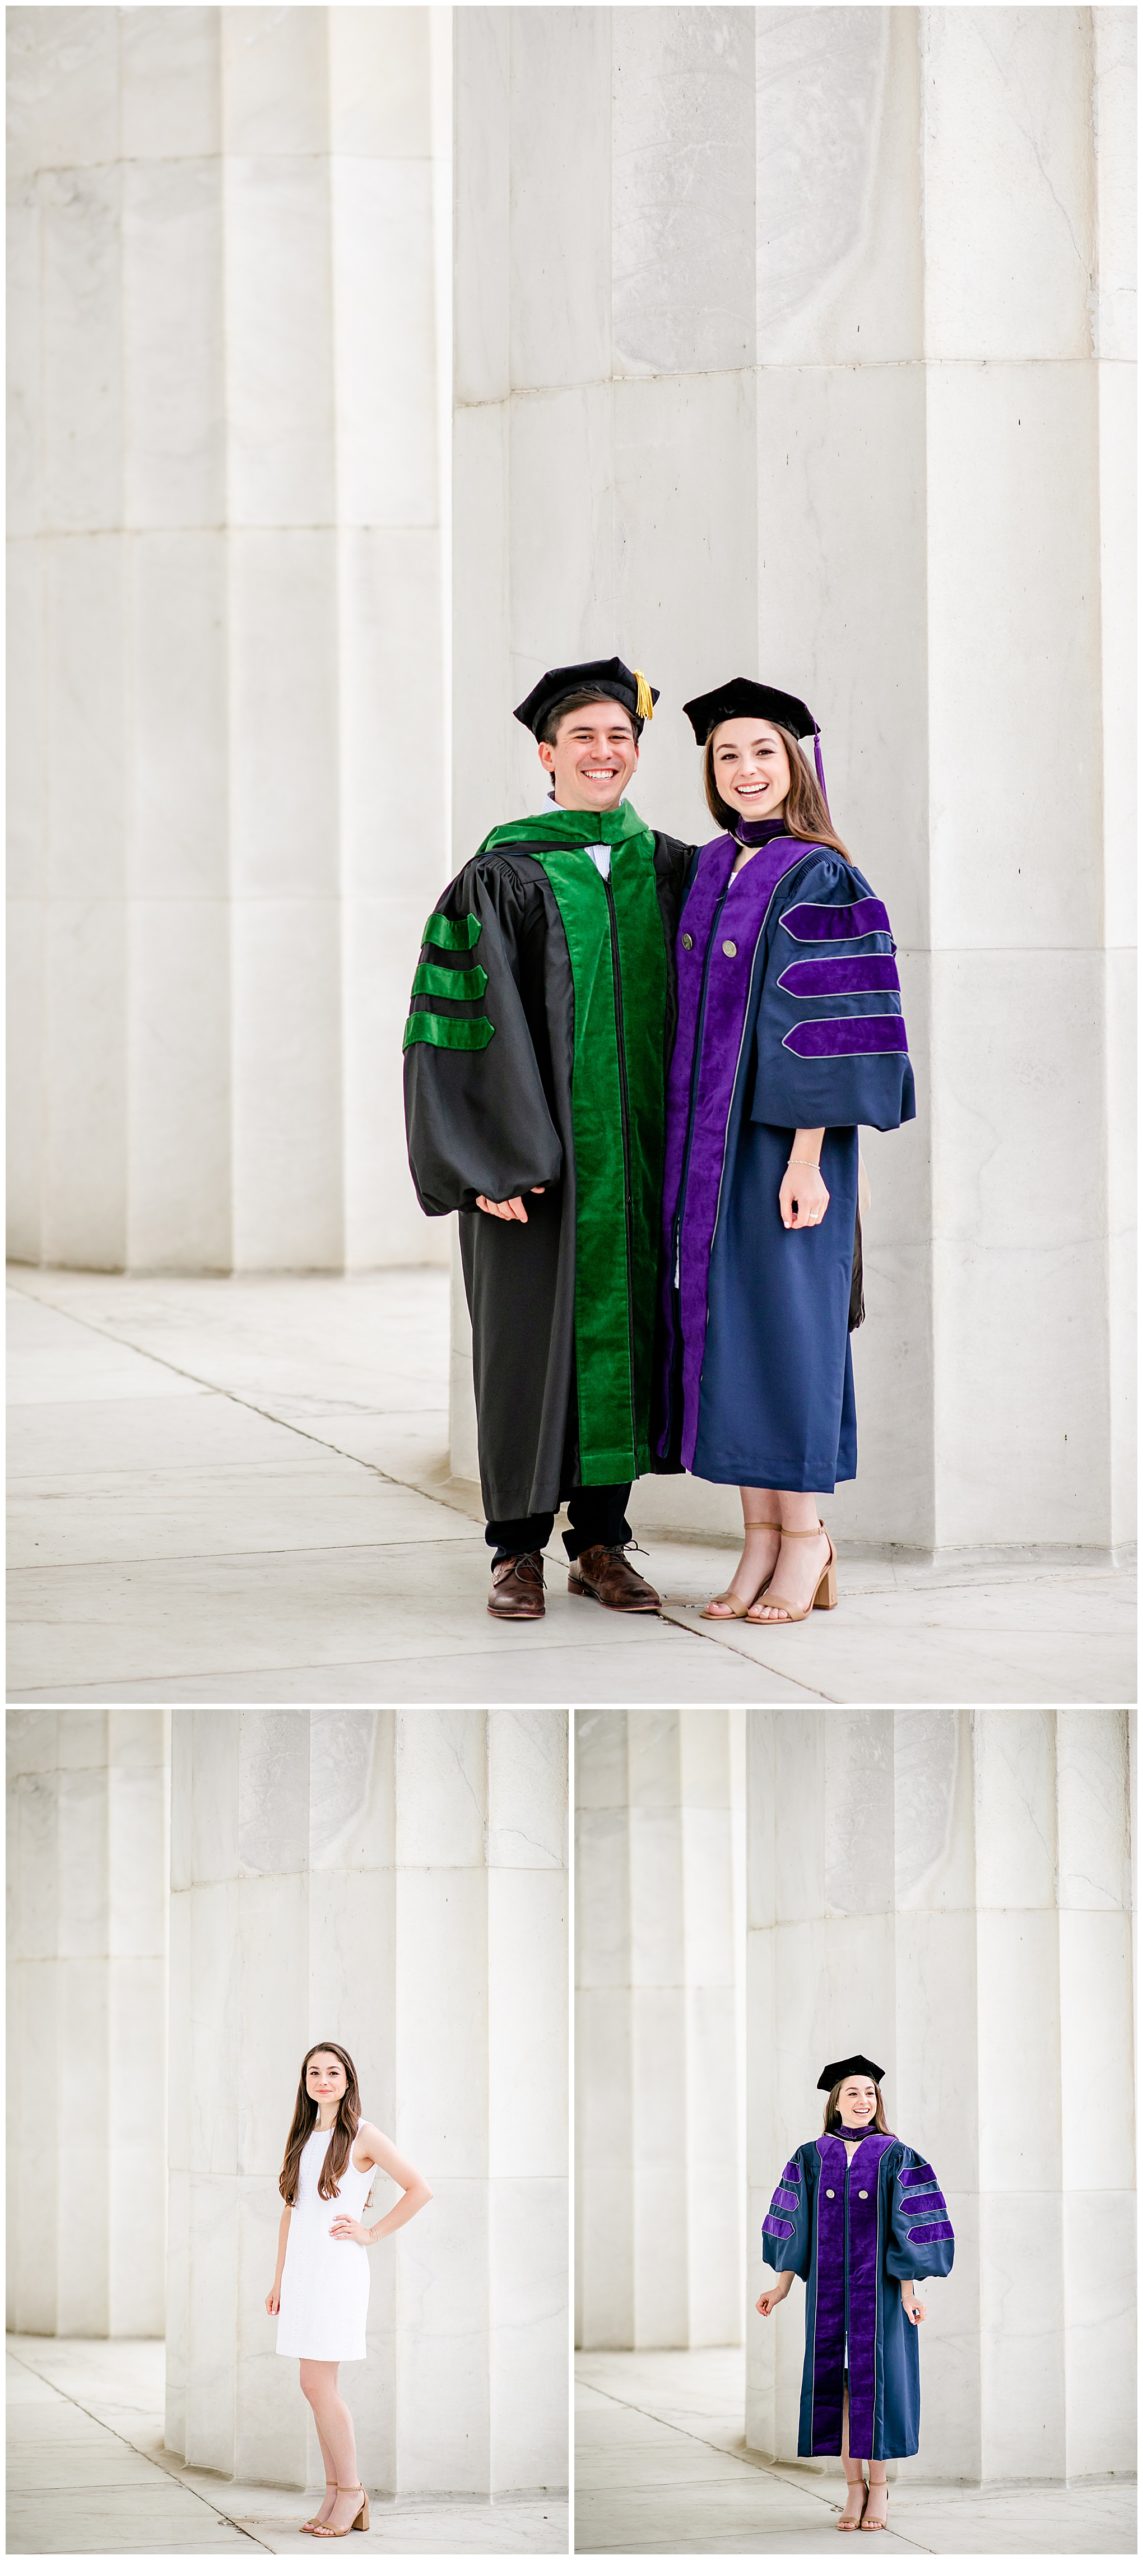 DC couple graduation photos, DC graduation portraits, DC grad photos, DC graduation photographer, spring graduation photos, Georgetown Law graduate, GW Medical School graduate, DC law school graduation photos, DC medical school graduation photos, Rachel E.H. Photography, couple smiling in caps and gowns, woman in cap and gown inside Lincoln Memorial